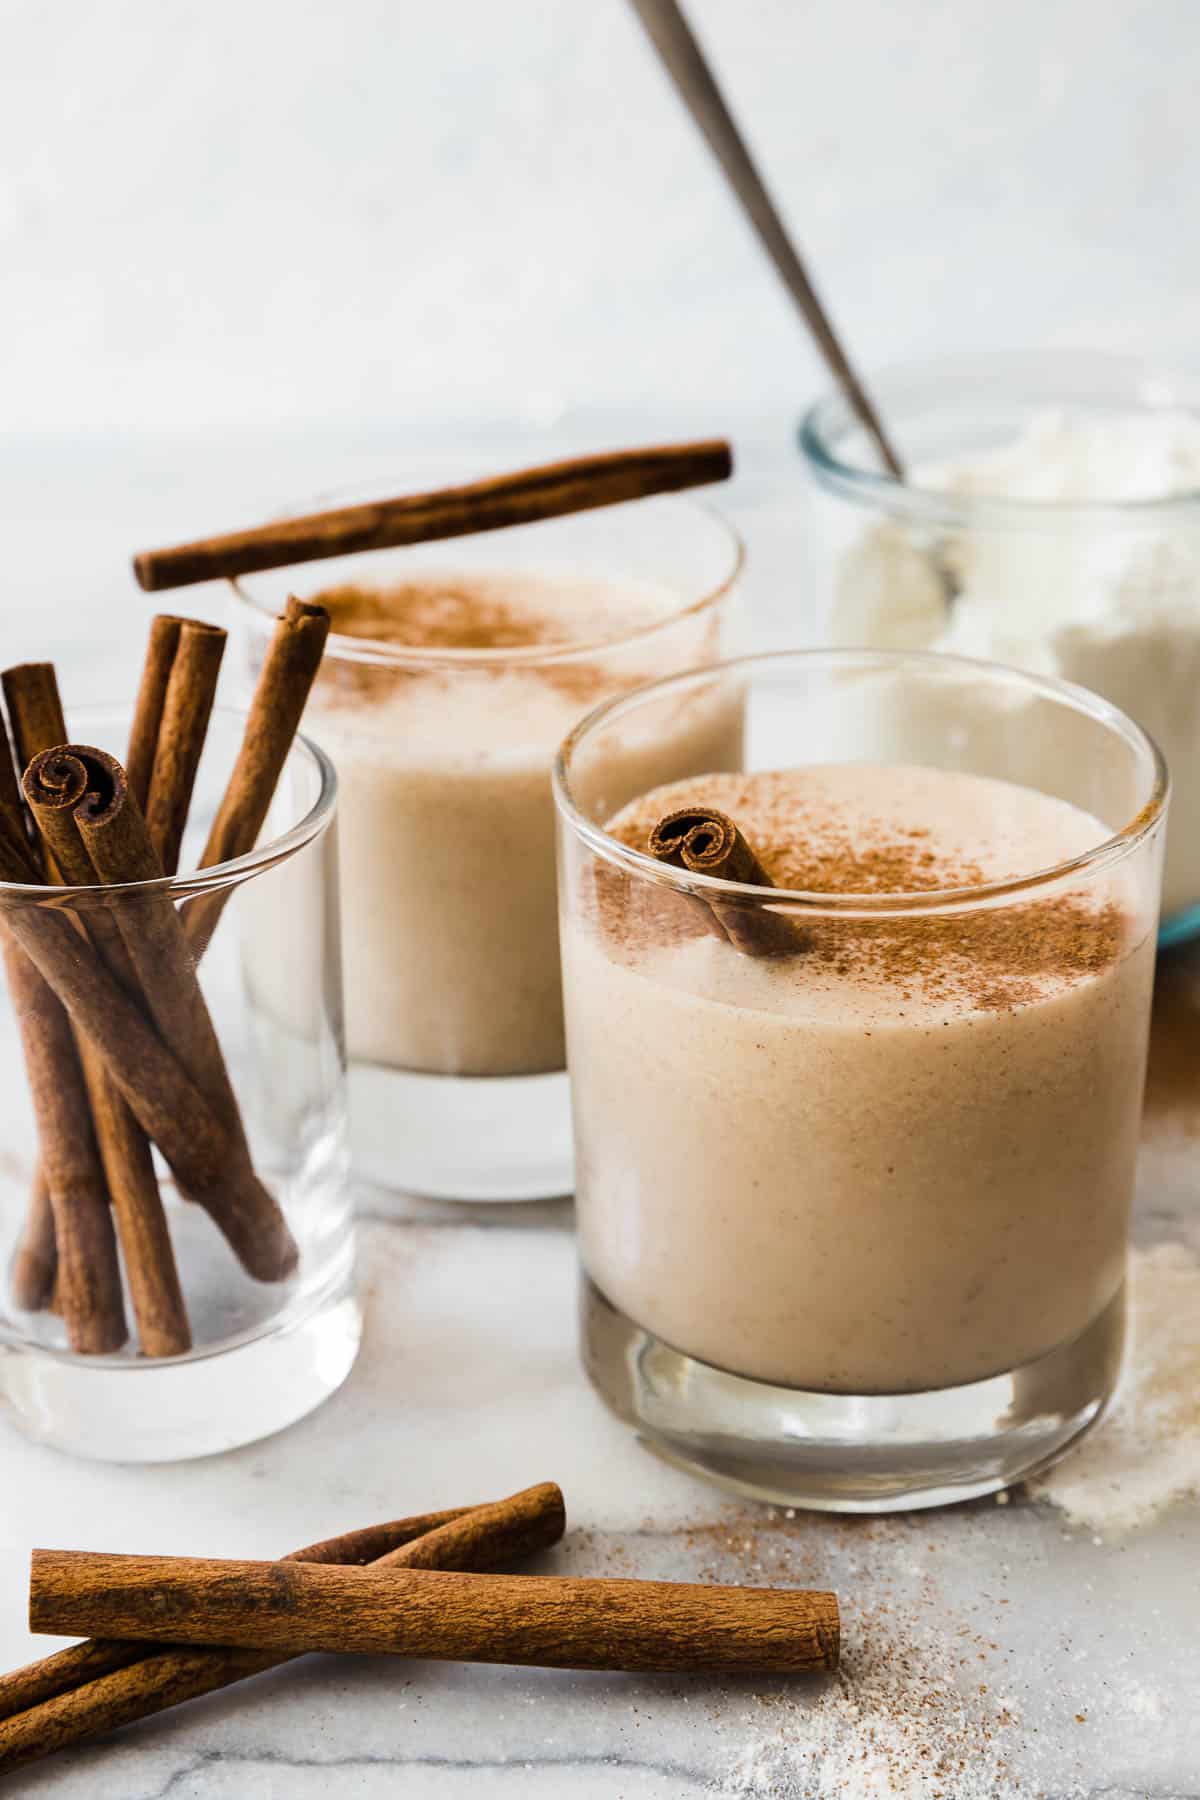 Two glasses of vanilla protein shake set beside a glass of cinnamon sticks. There is a jar of vanilla protein powder in the background.